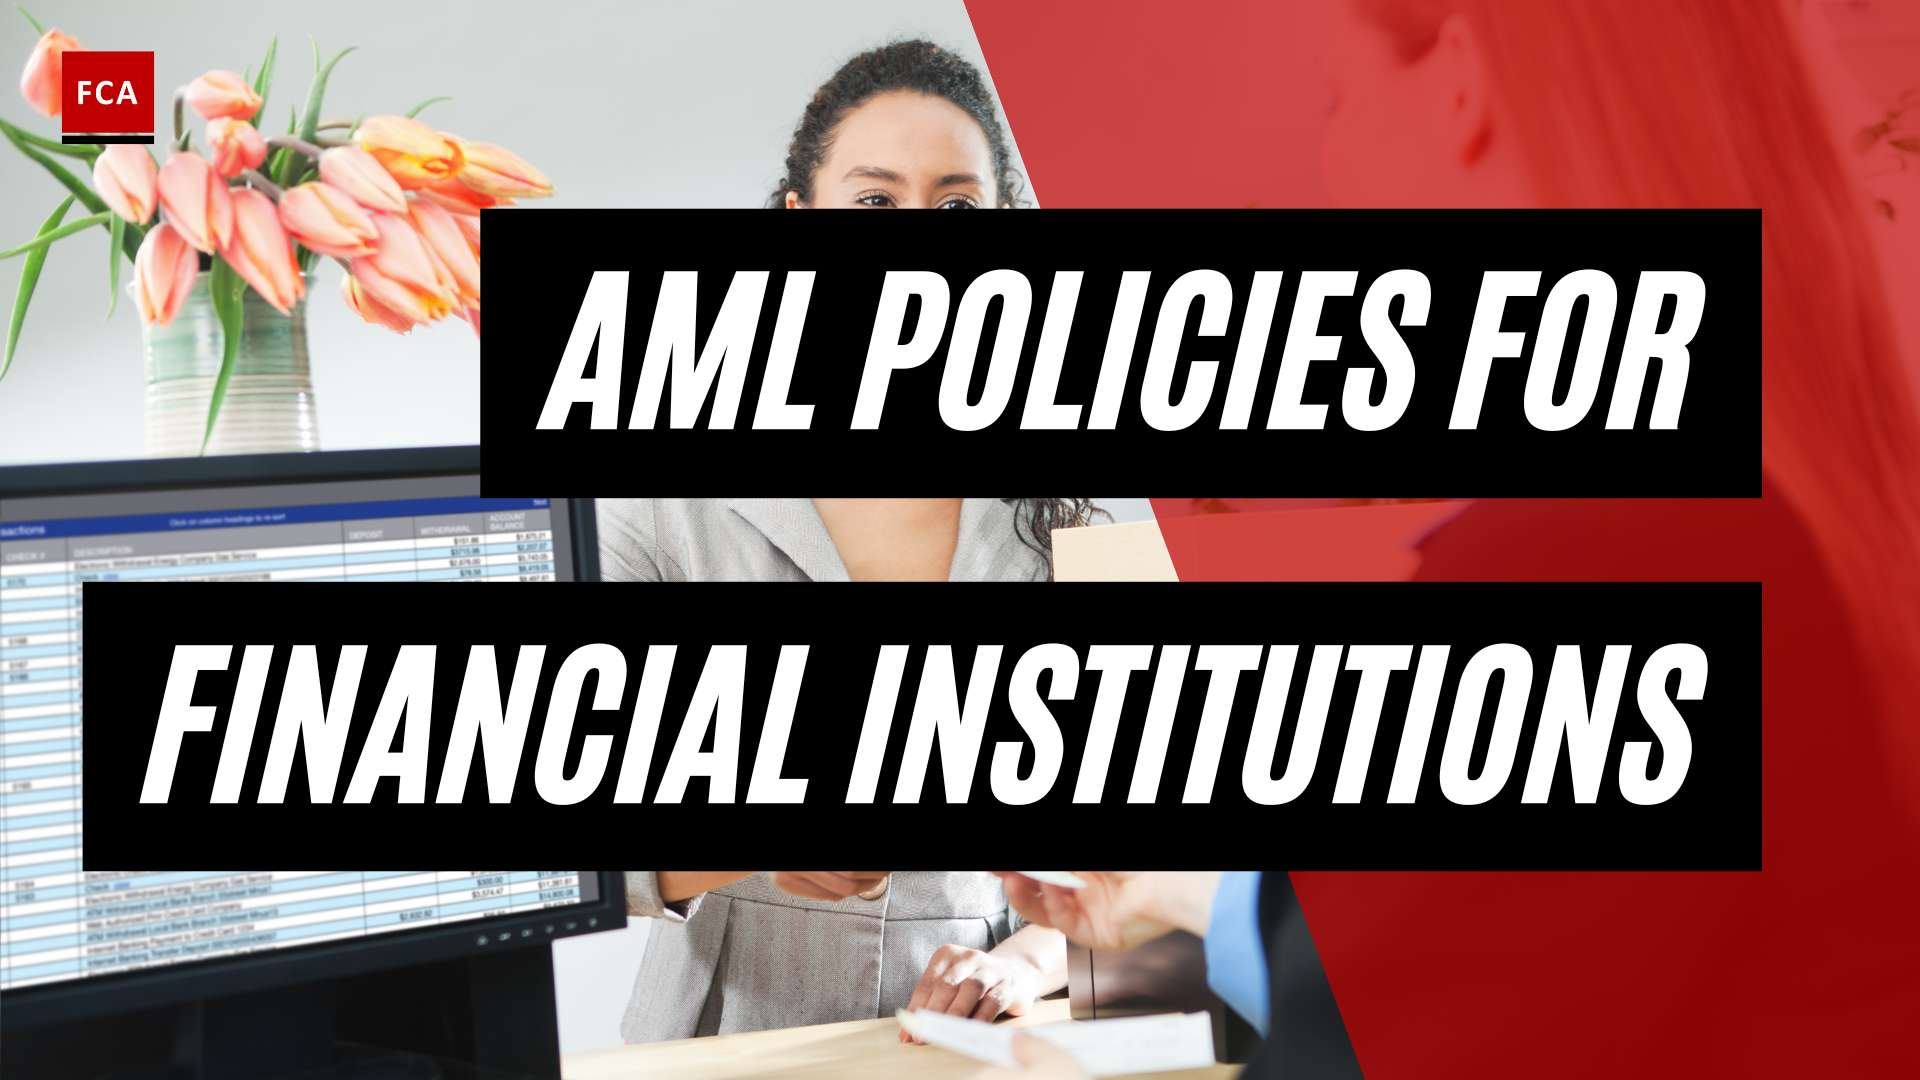 Cracking Down On Money Laundering: Effective Aml Policies For Financial Institutions